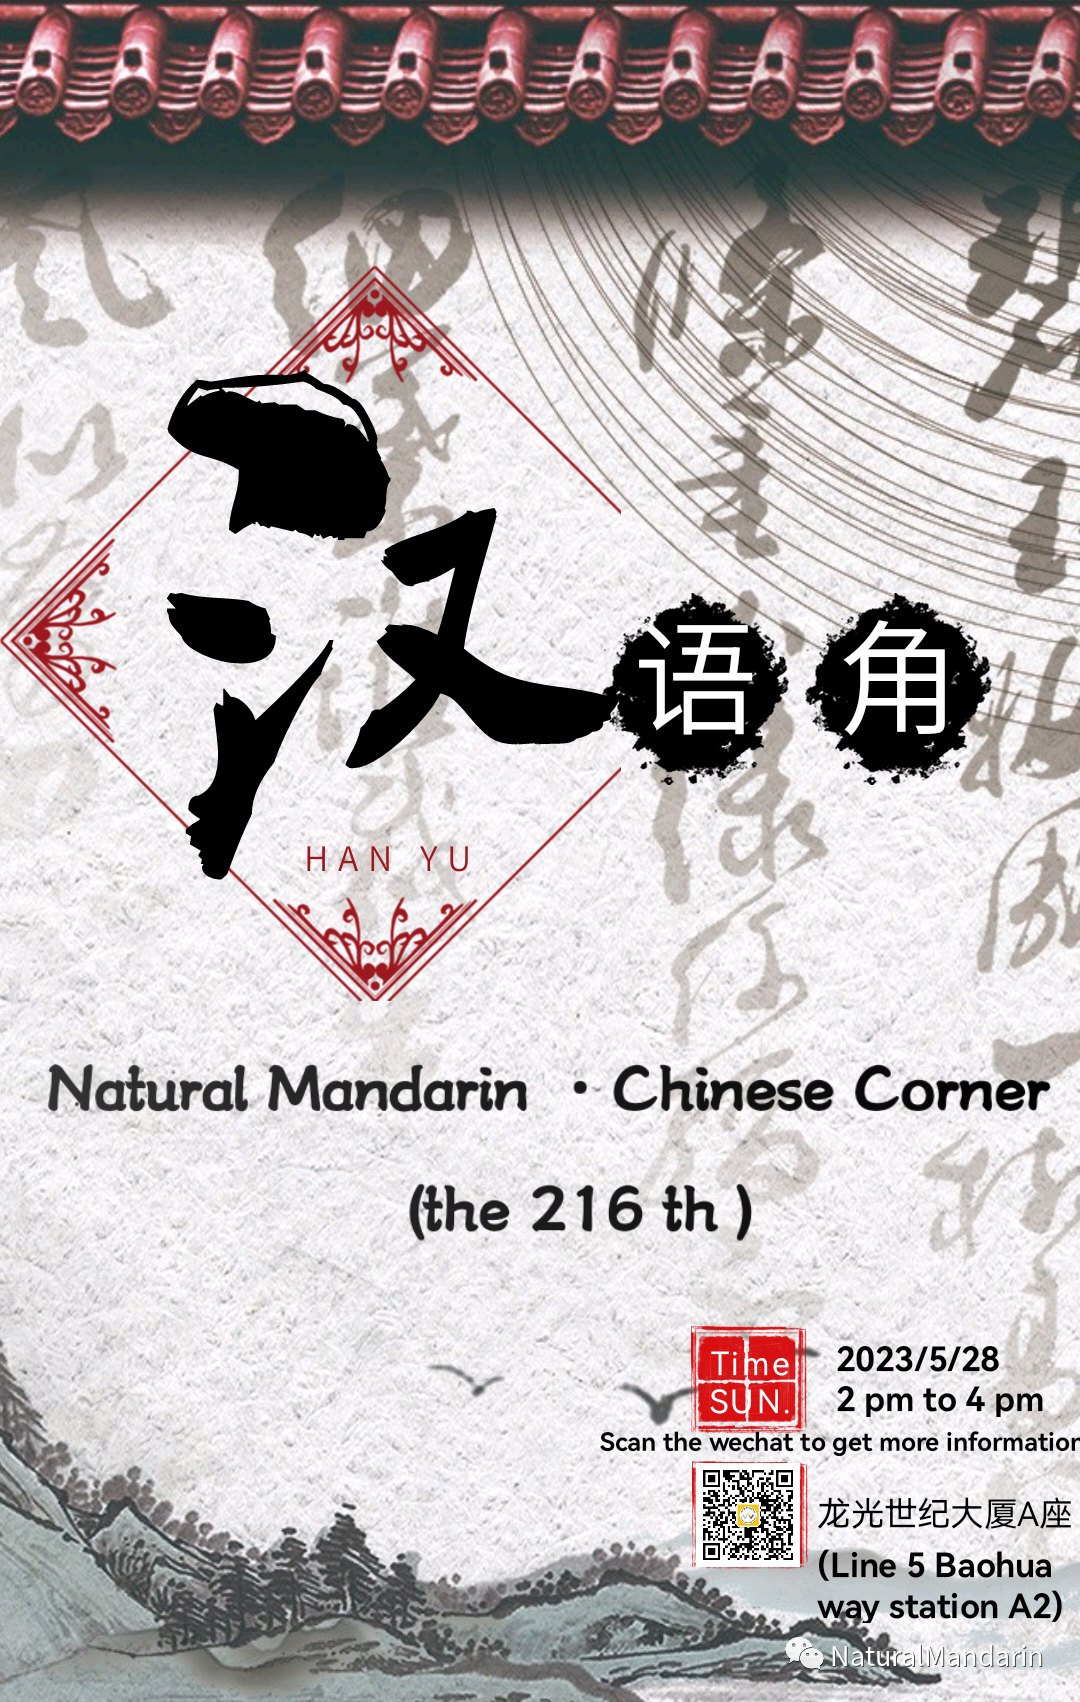 Featured image for “Practice Mandarin in our new office”